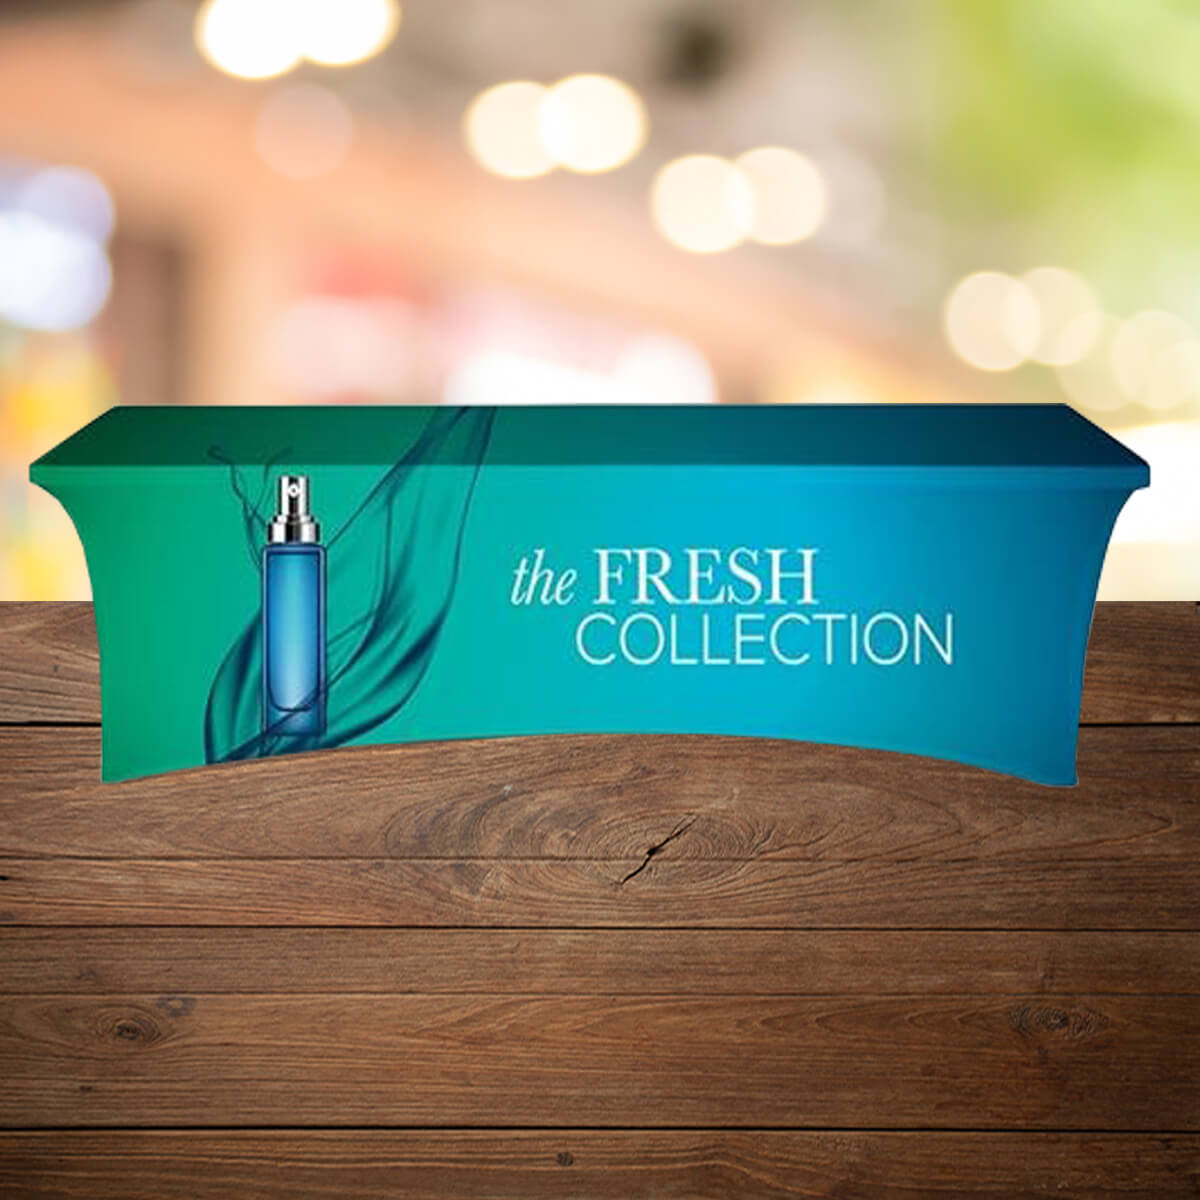 Stretch table cloth green to blue gradient display by Curative Printing